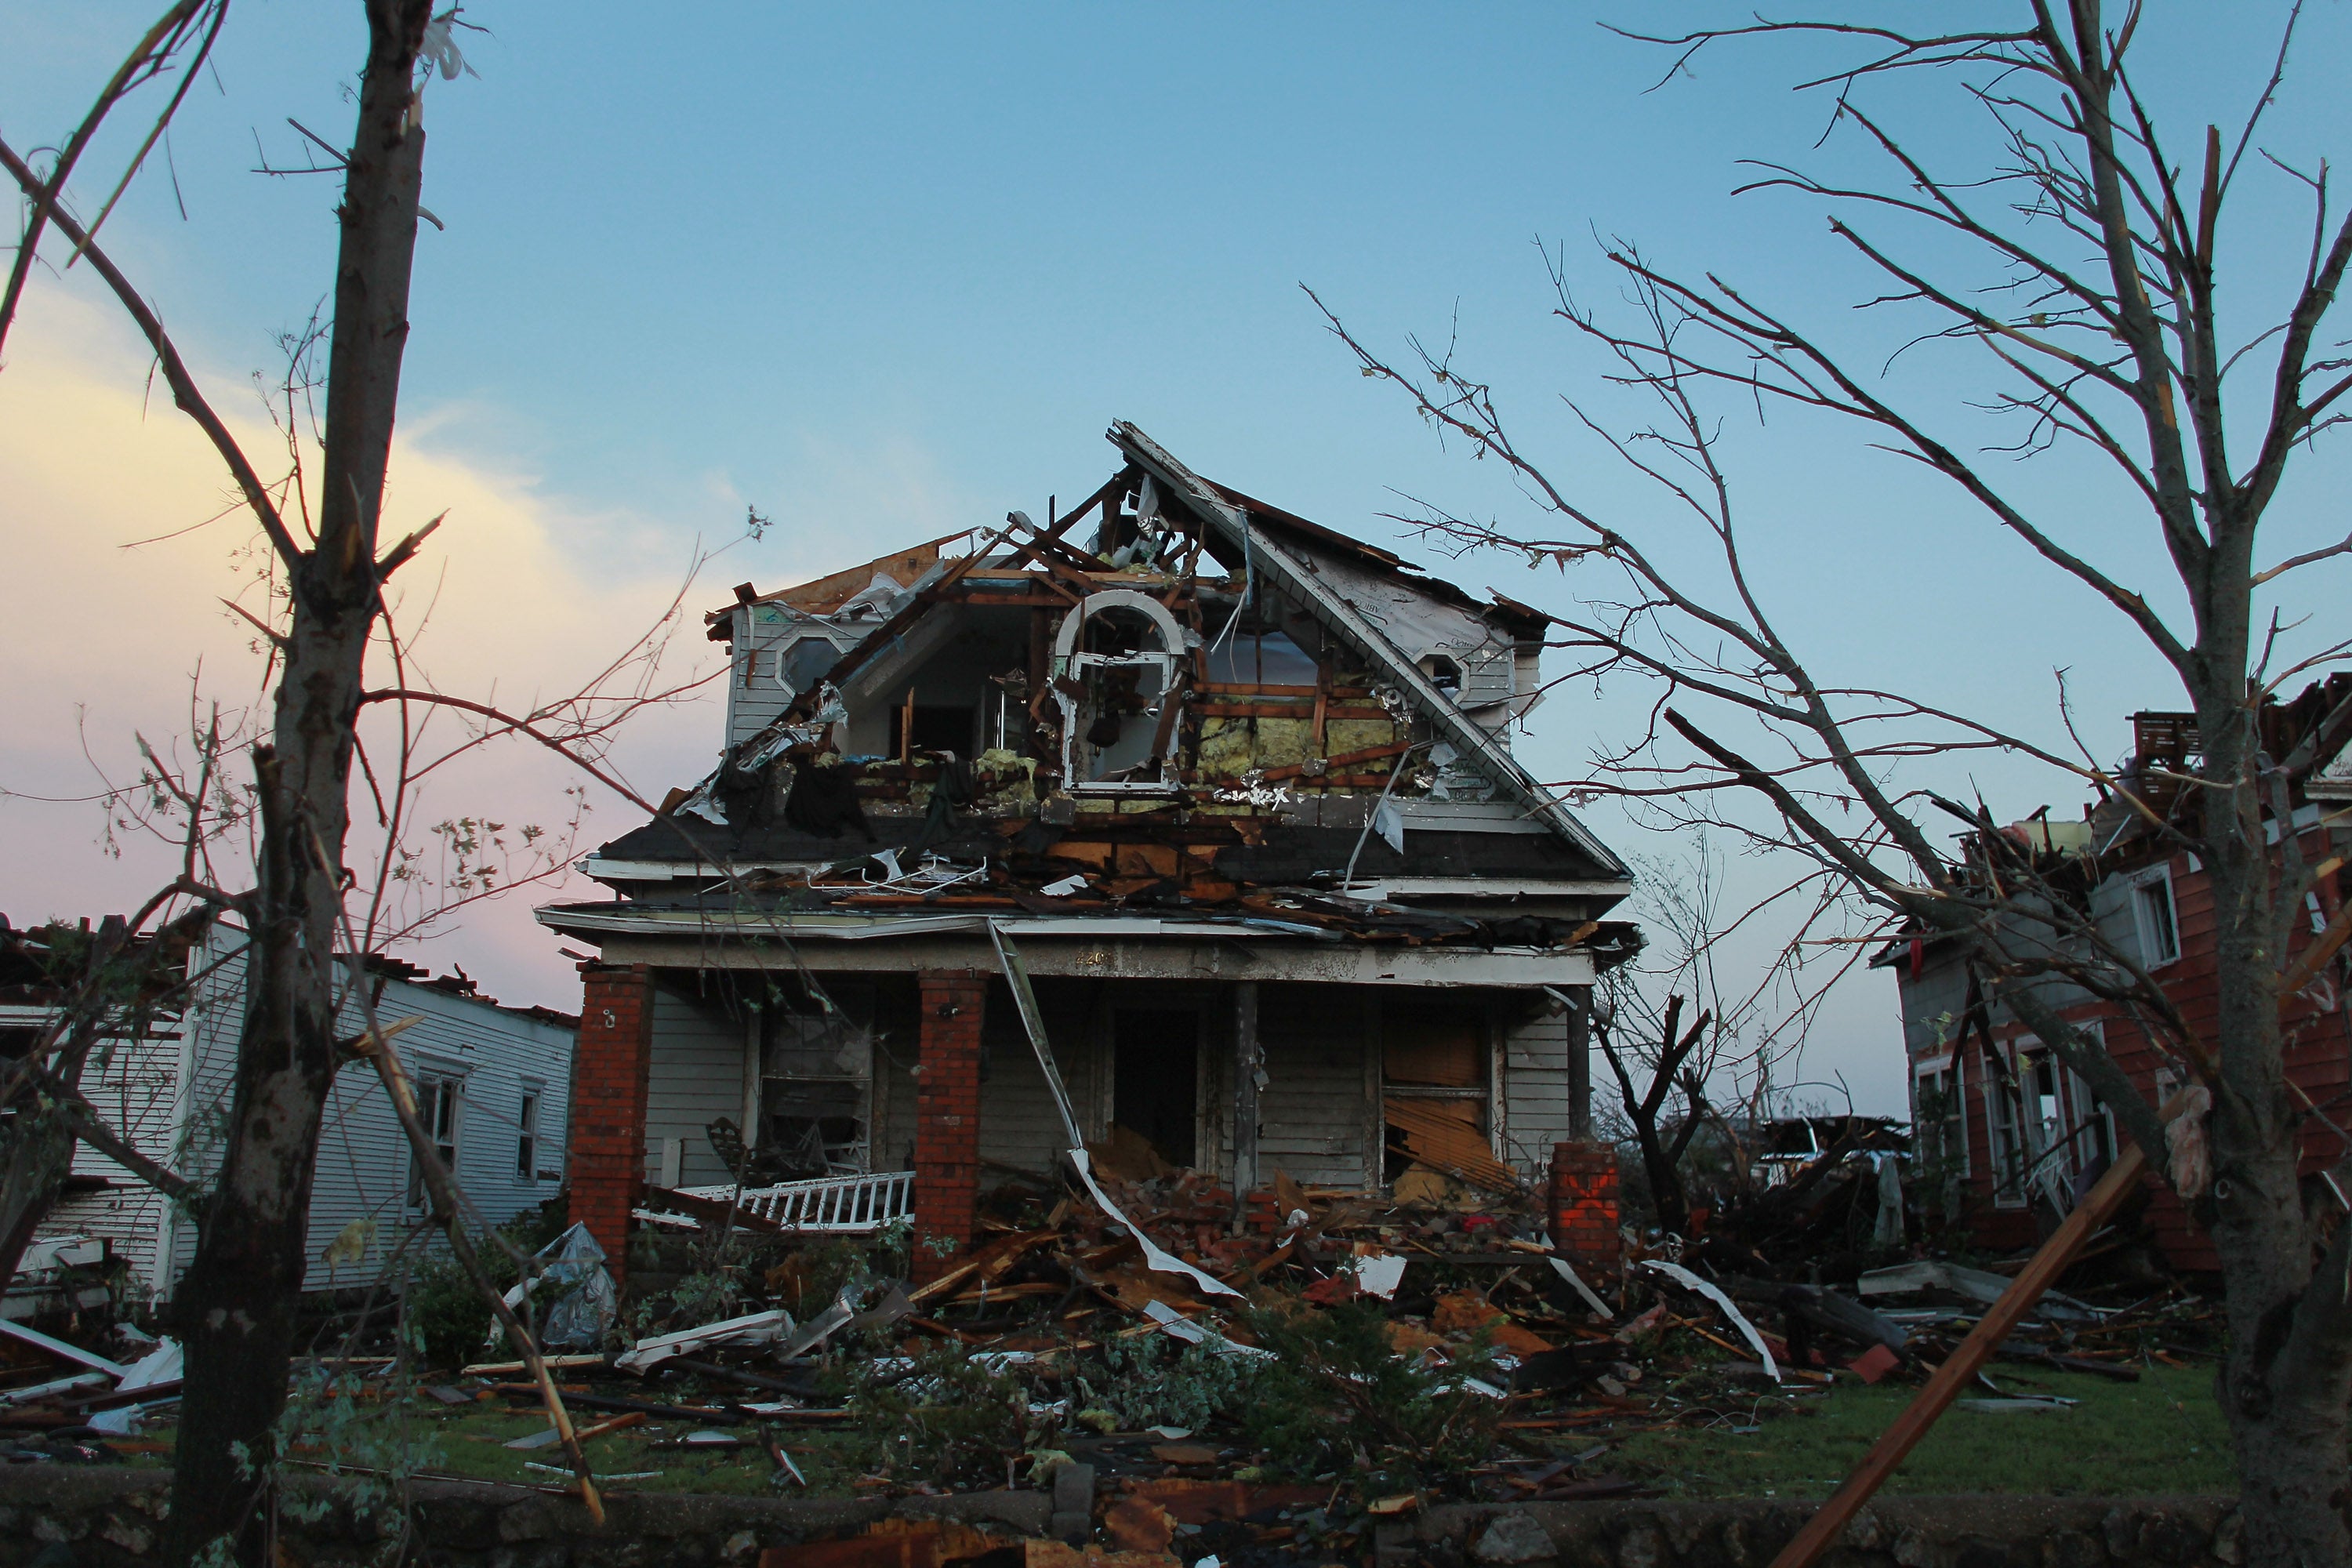 A destroyed home after a massive tornado passed through Joplin, Missouri, in May 2011. (Photo: Joe Raedle, Getty Images)